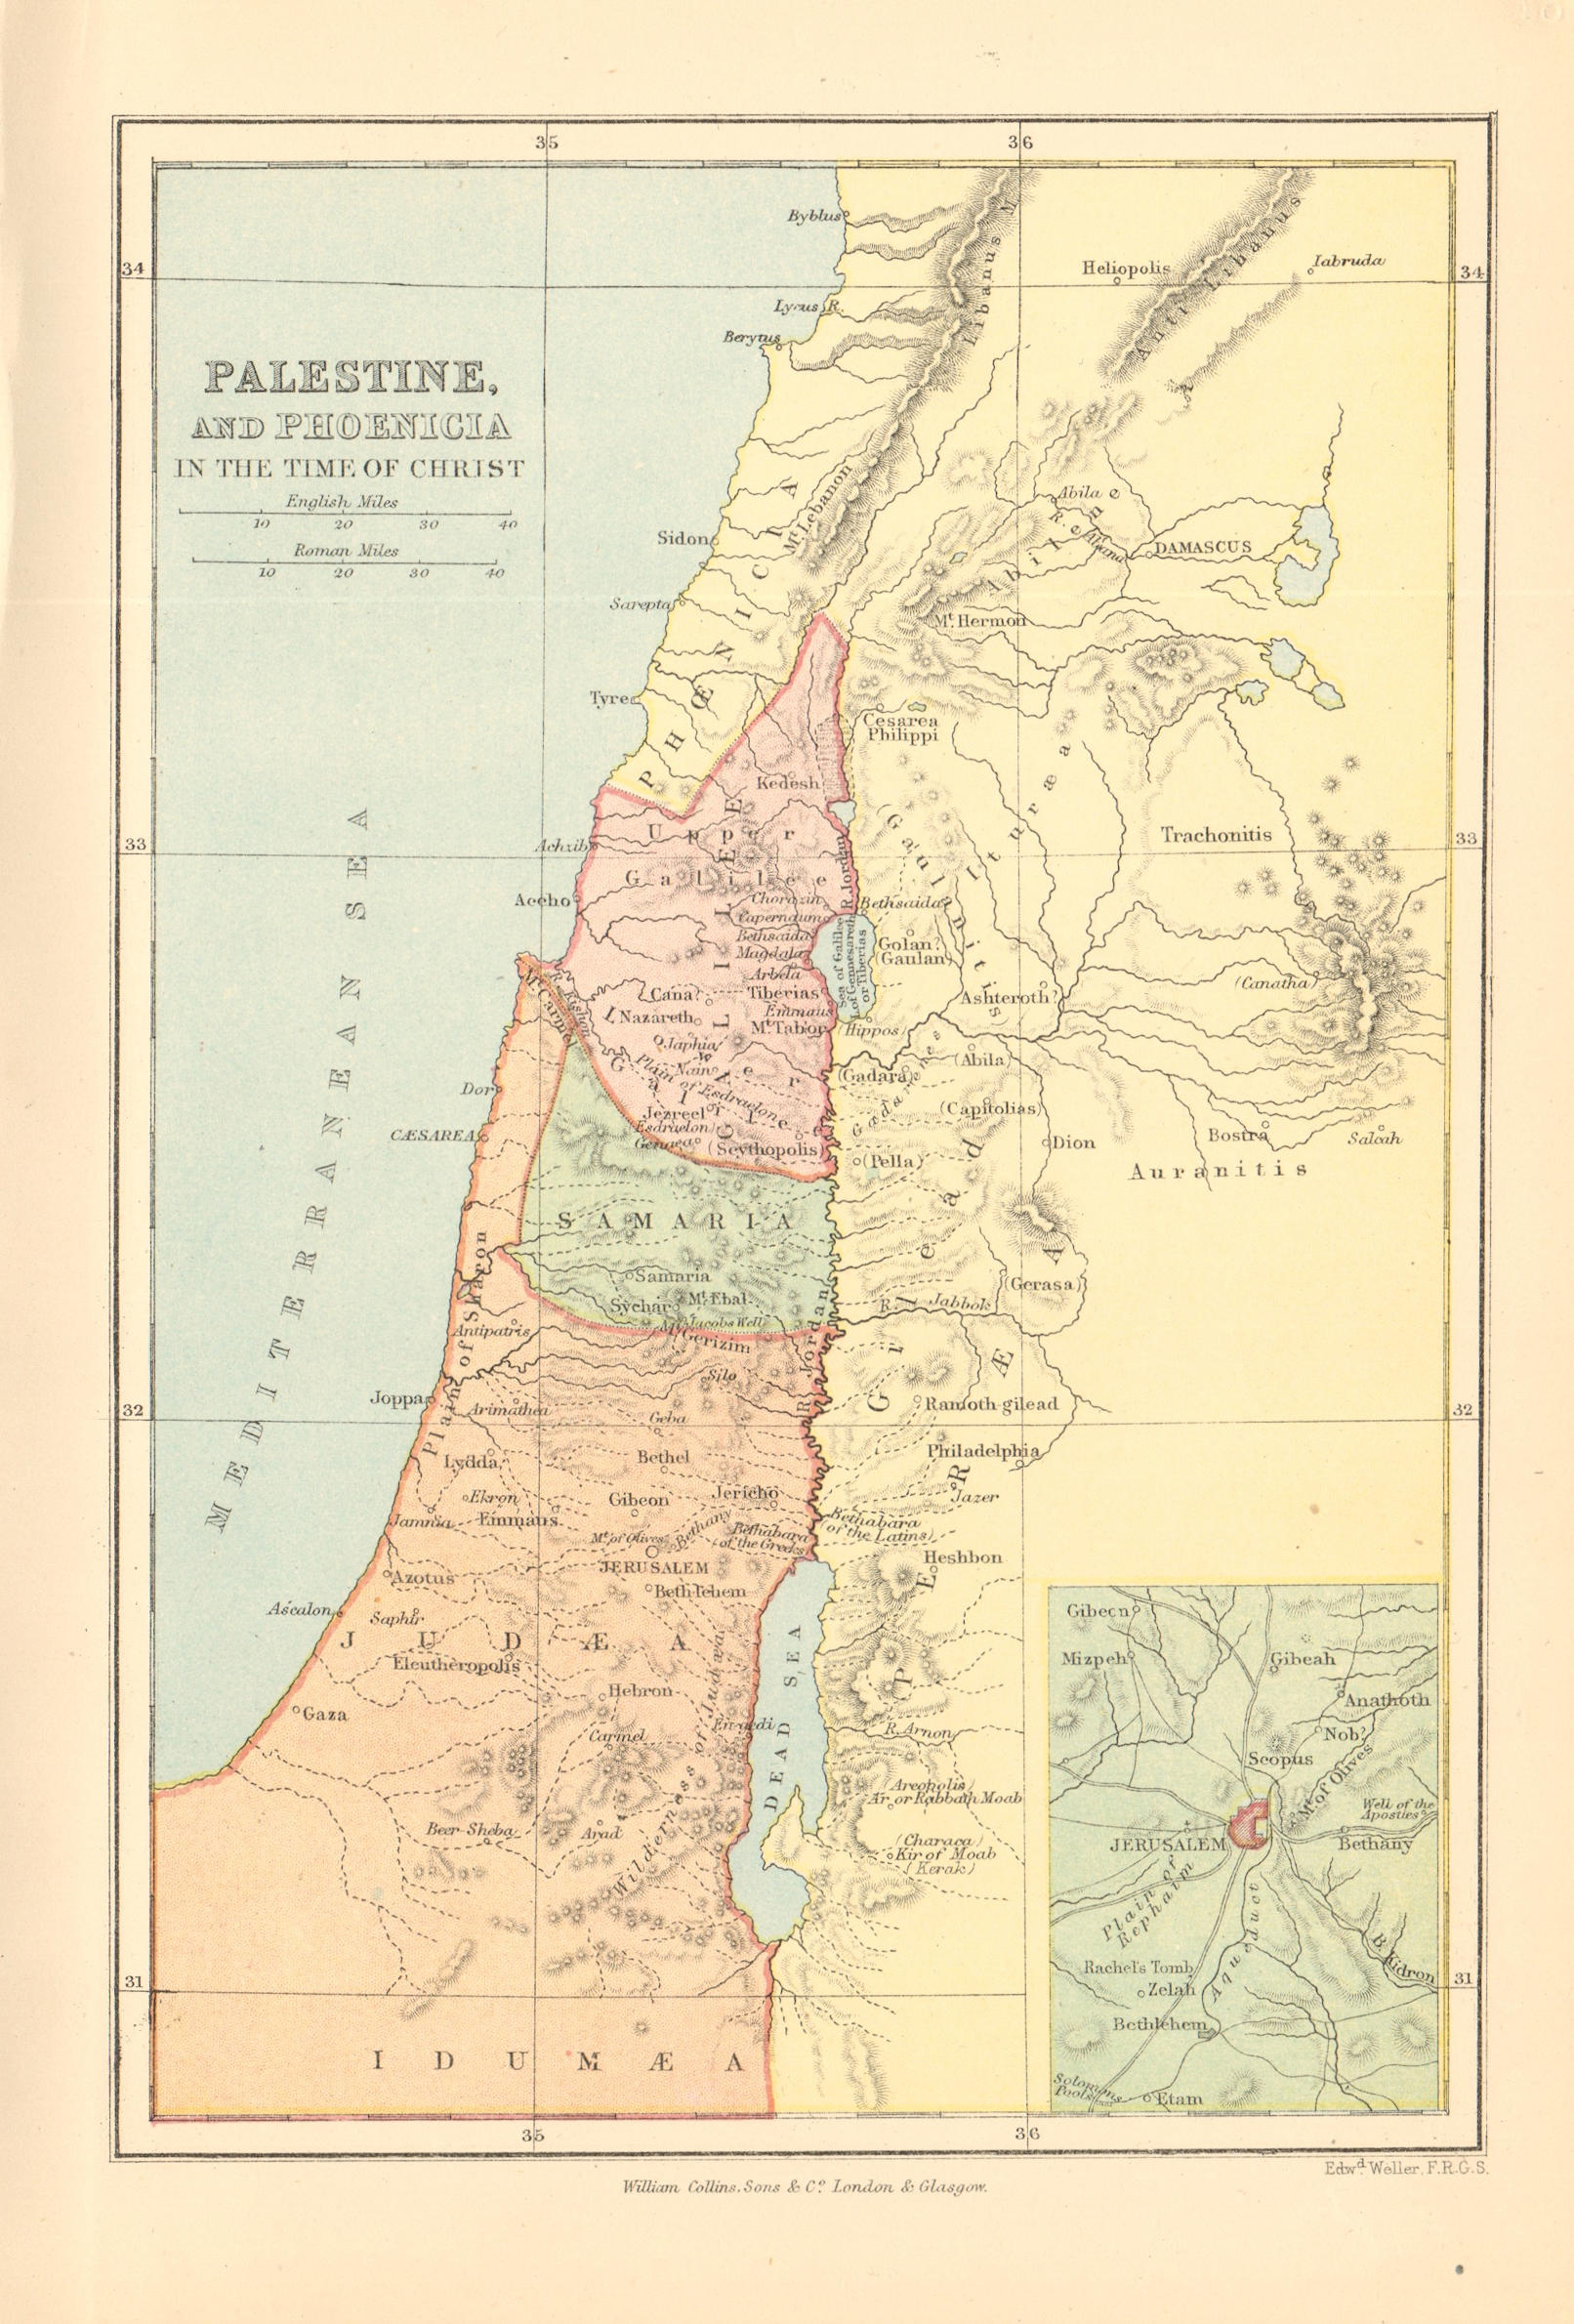 Associate Product Palestine & Phoenicia in the time of Christ'. Judea Gallilee Samaria 1876 map